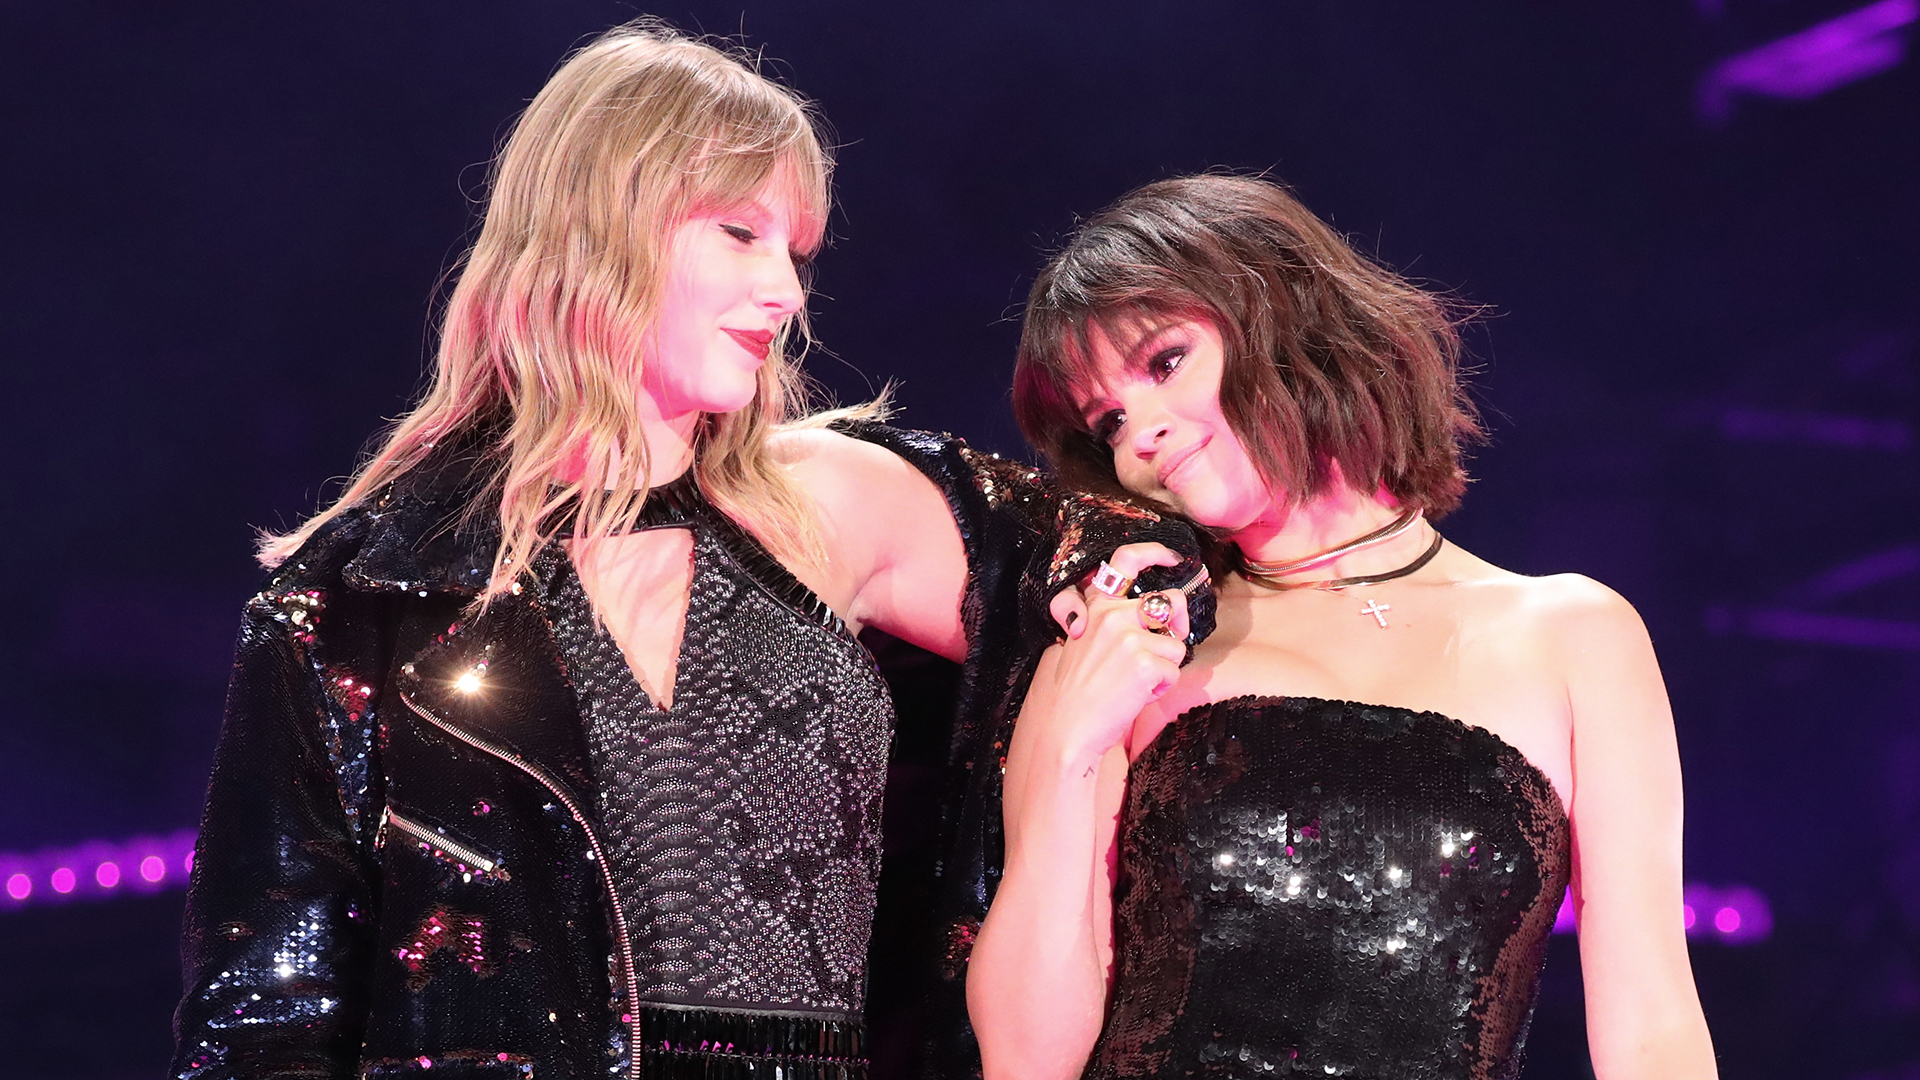 PASADENA, CA - MAY 19:  Taylor Swift and Selena Gomez perform onstage during the Taylor Swift reputation Stadium Tour at the Rose Bowl on May 19, 2018 in Pasadena, California  (Photo by Christopher Polk/TAS18/Getty Images)